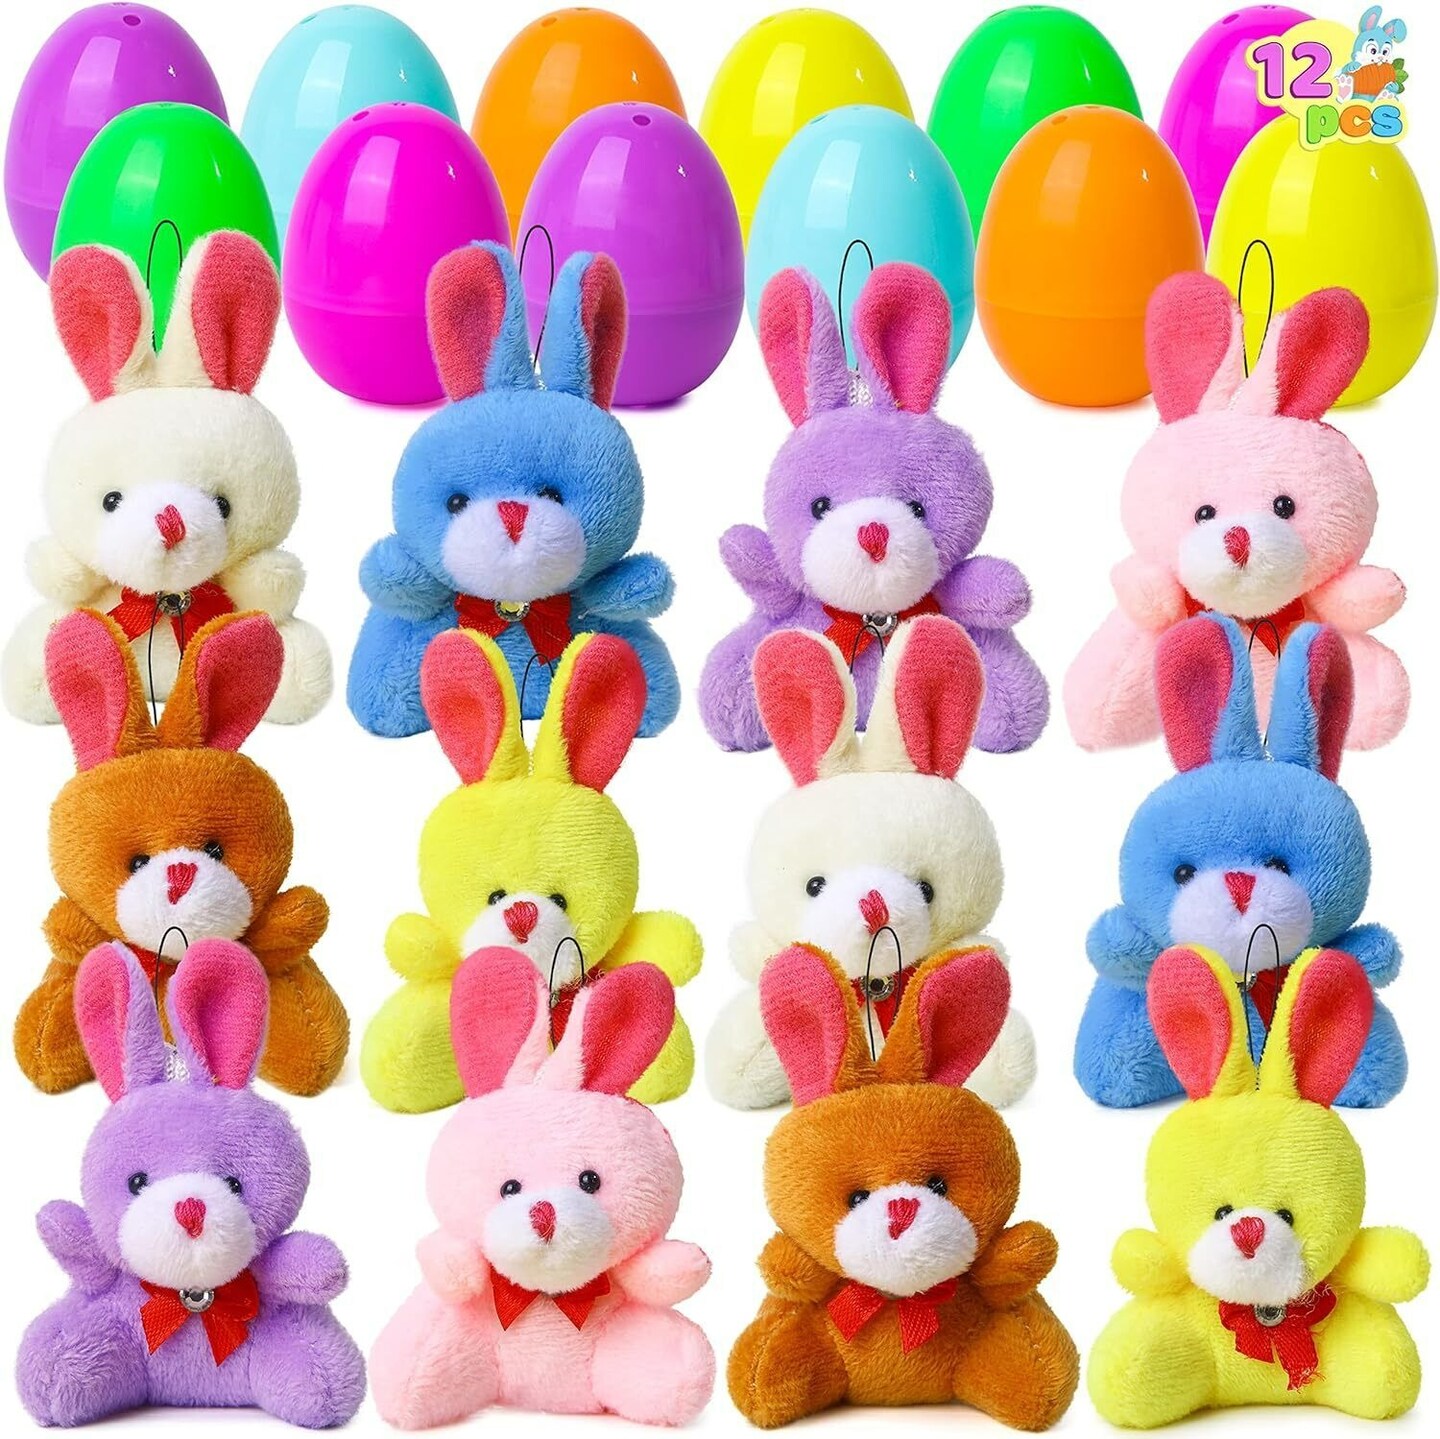 12 Pcs Filled Easter Eggs with Plush Bunny, Bright Colorful Bunnies Kids